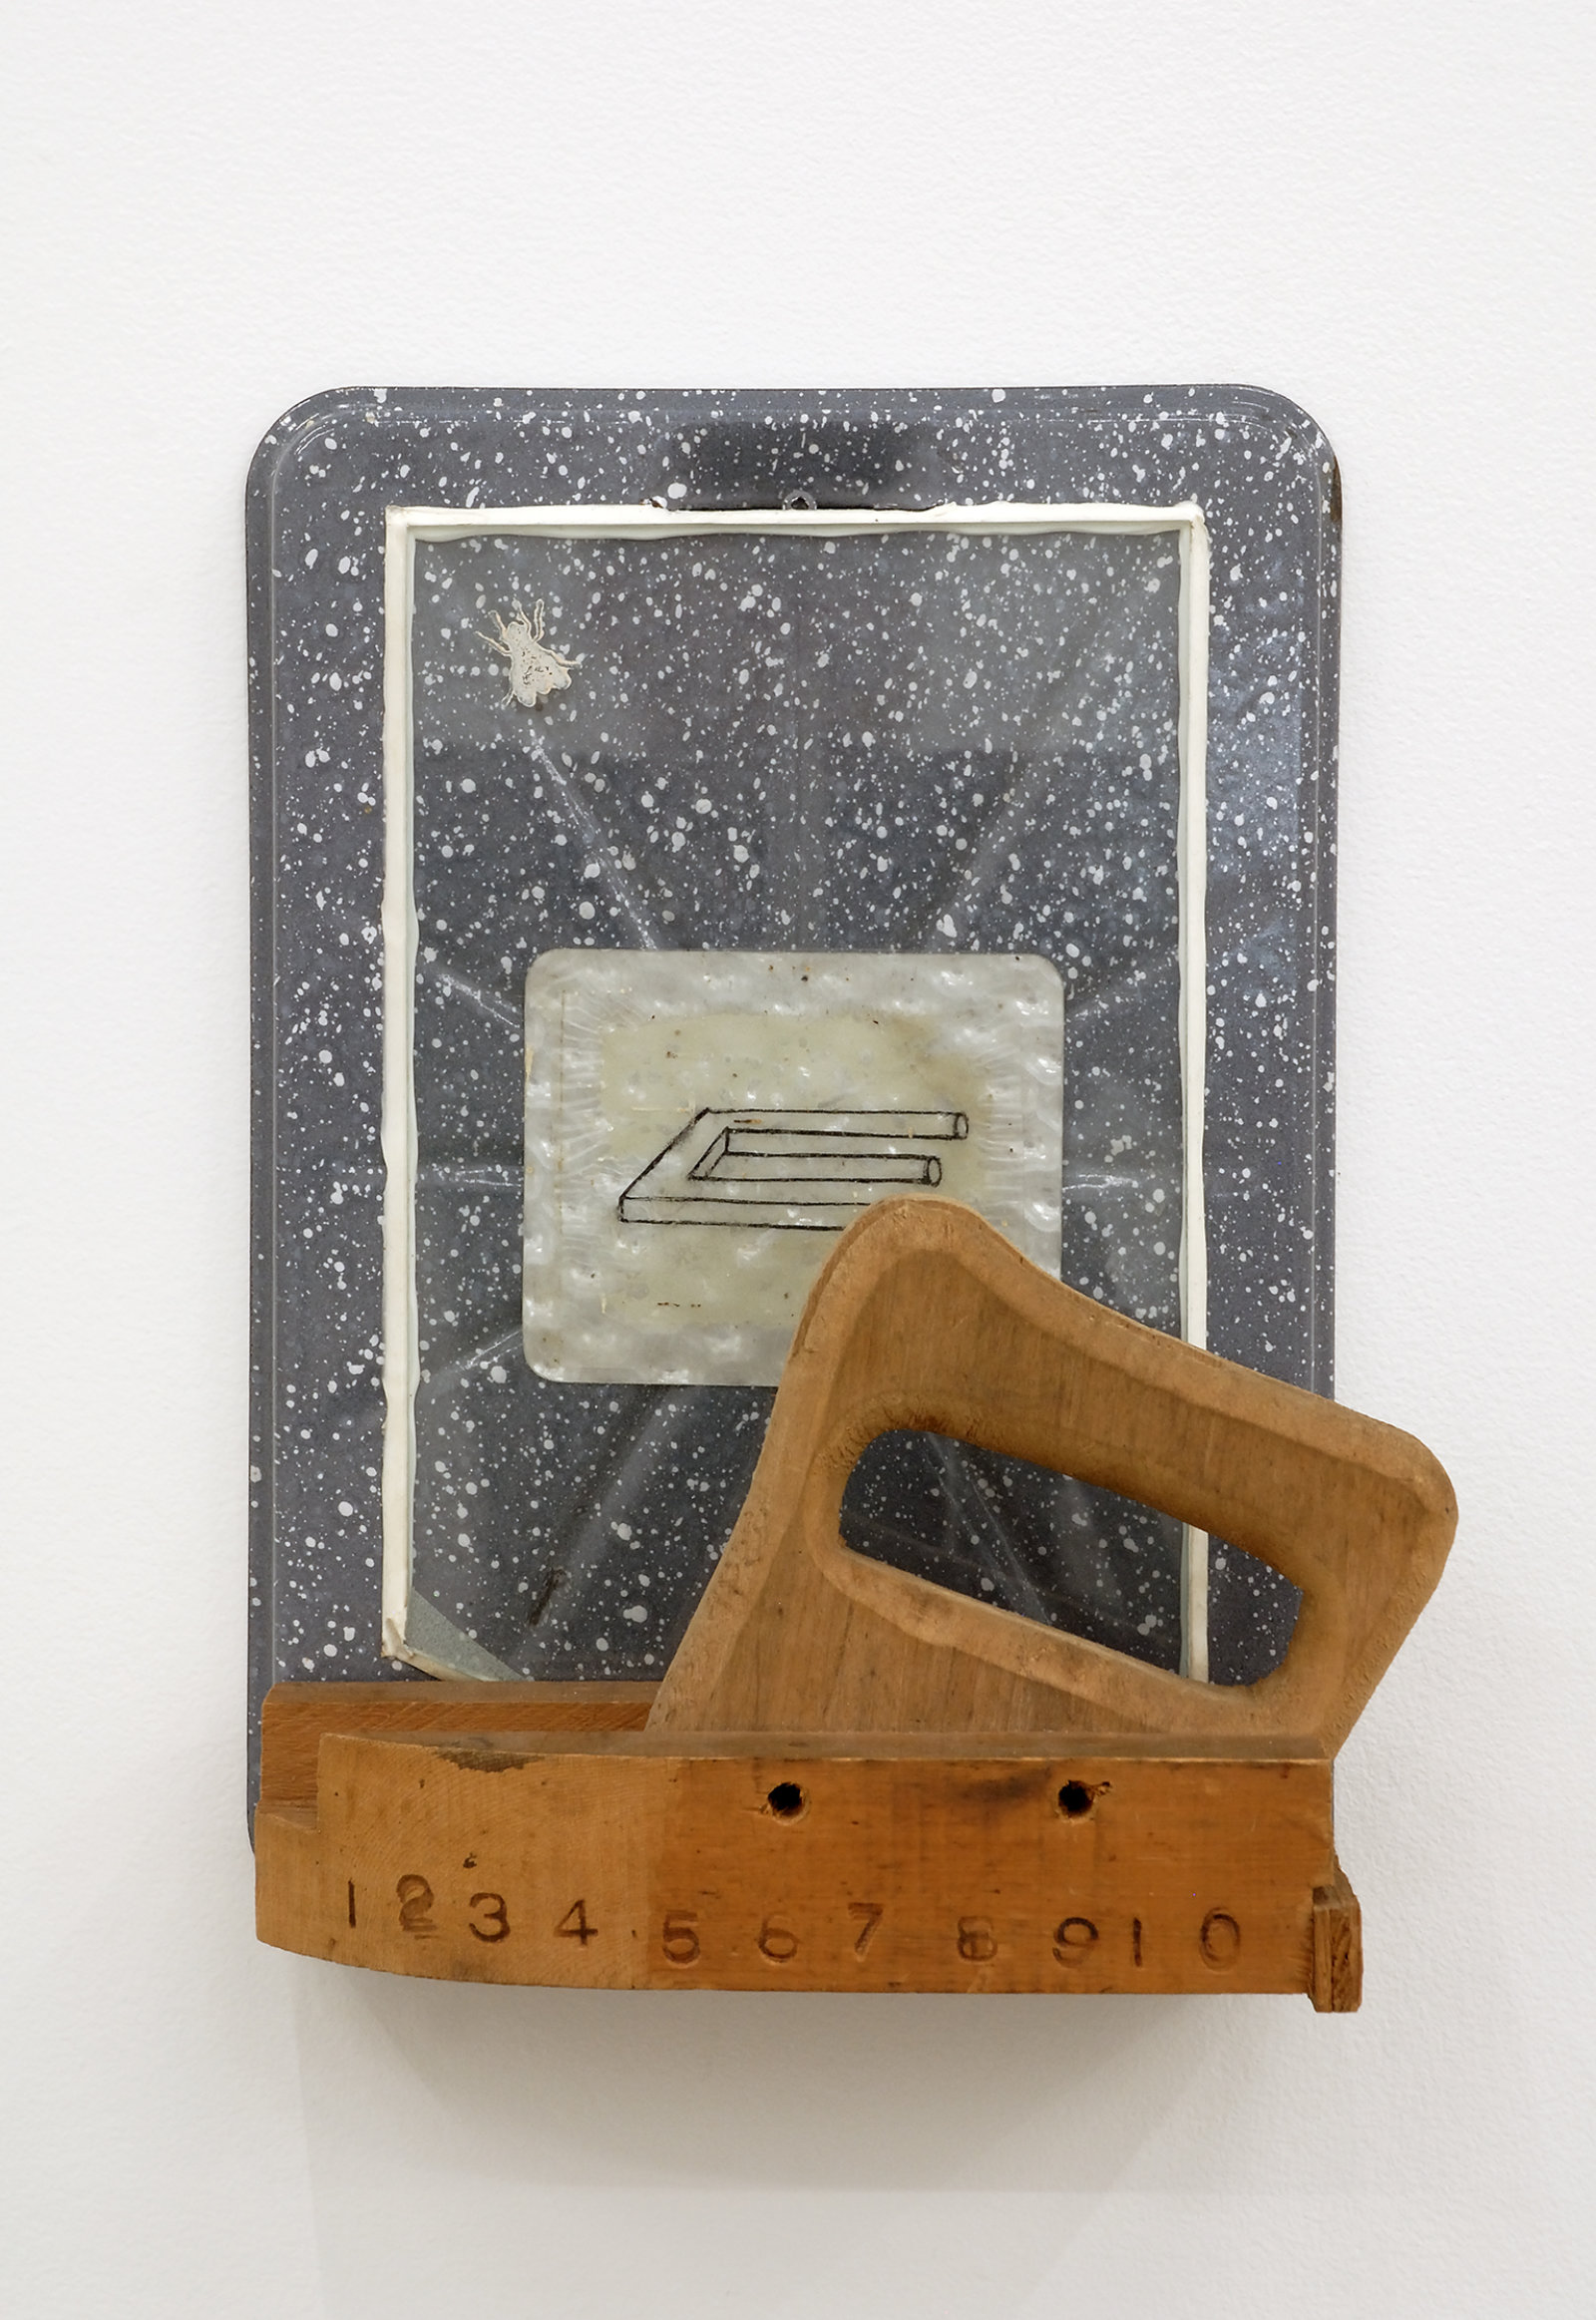 Jerry Pethick, Proximity Device, 1990, enamelled steel broiler, ink drawing on devil's tuning fork on rolux, wood, fly stamp, 13 x 10 x 4 in. (33 x 25 x 10 cm)  